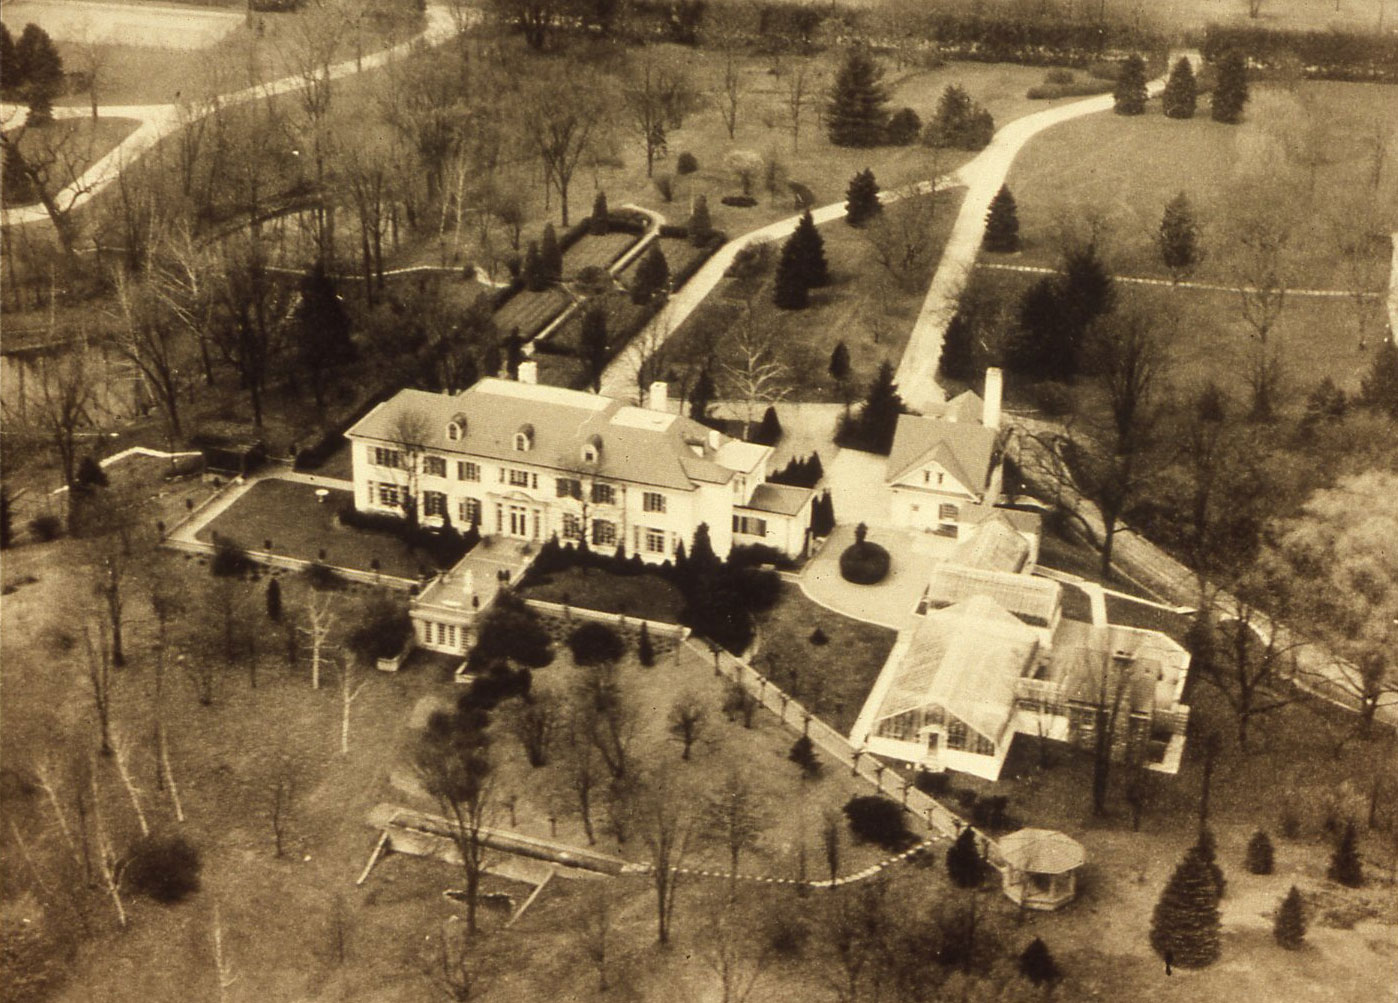 Aerial view of a large, white, Colonial Revival mansion with a mansard roof set with dormer windows. There is a group of large greenhouses, a garage/servants building and a gazebo also on the estate.